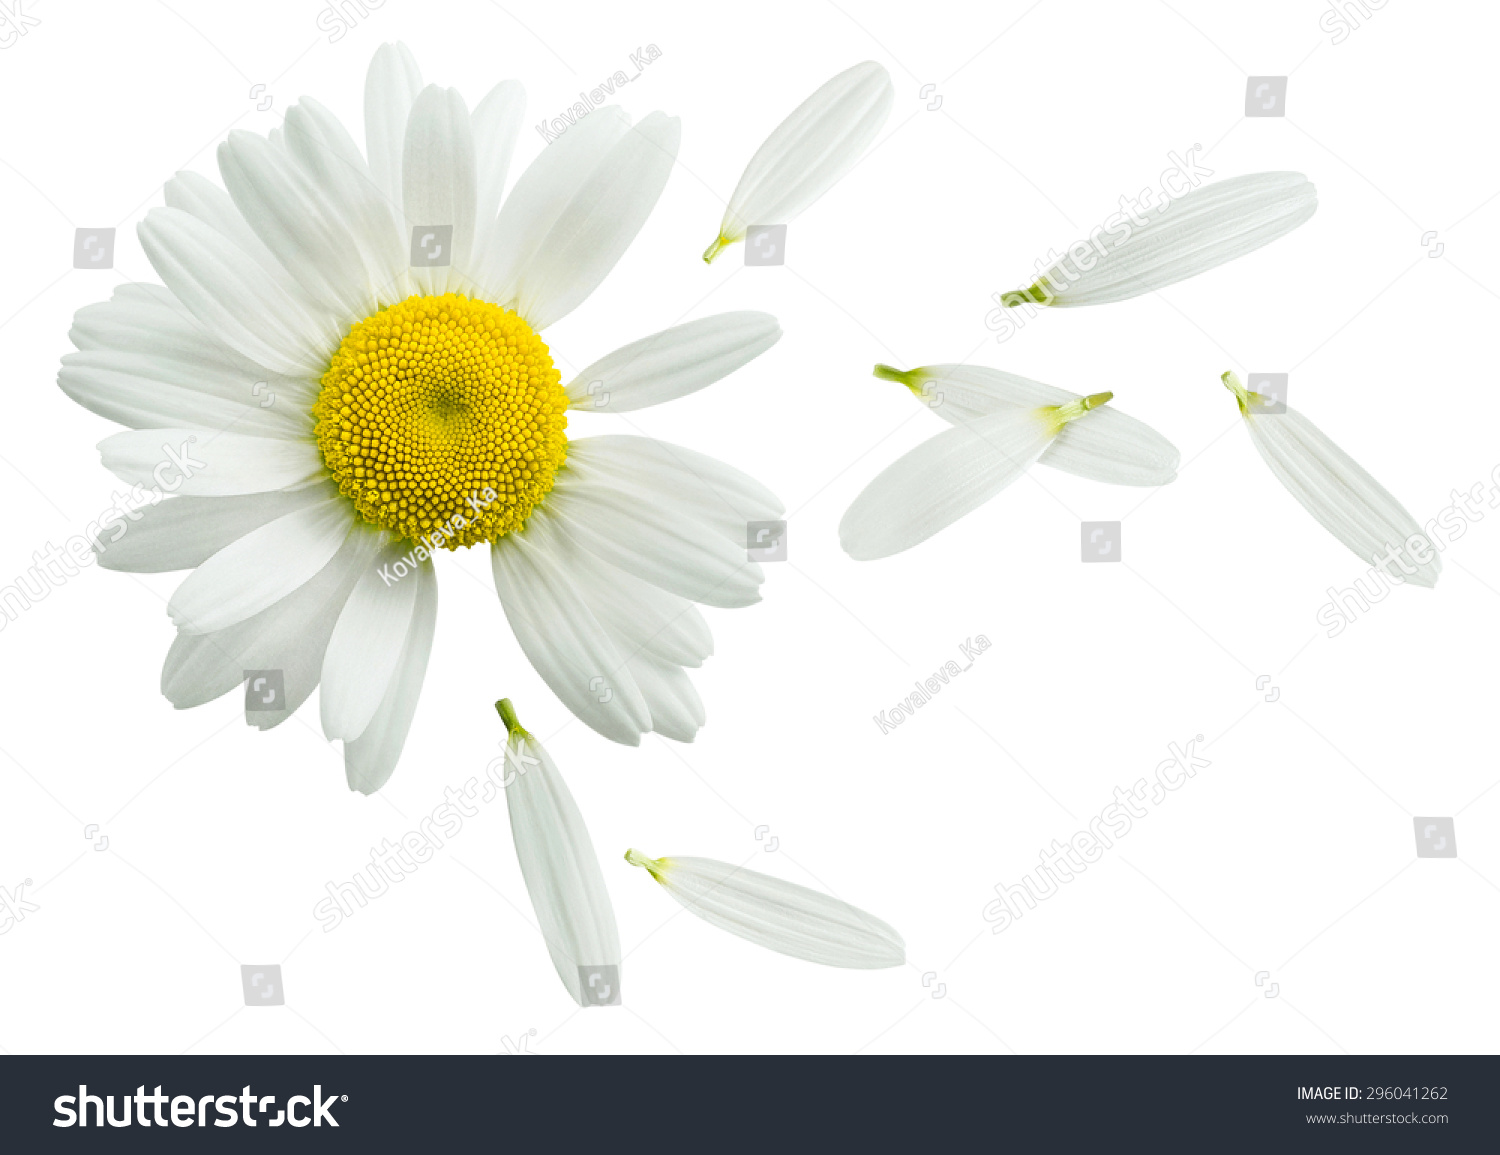 Chamomile flower flying petals, guess on daisy, isolated on white background as poster design element #296041262